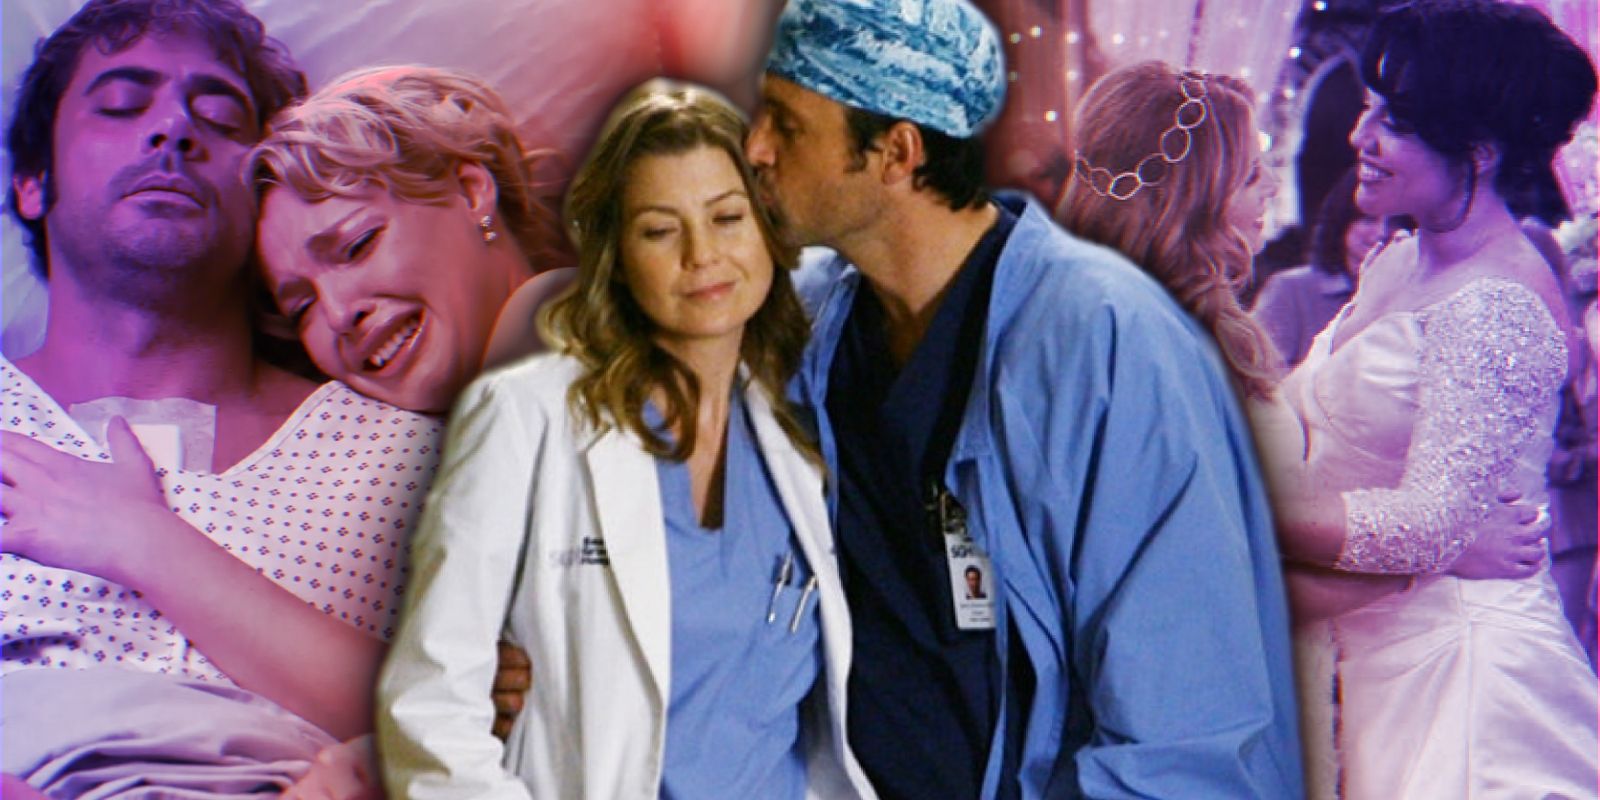 Derek kissing Meredith’s cheek in Grey’s Anatomy with Izzie crying over Denny and Calzona’s wedding.